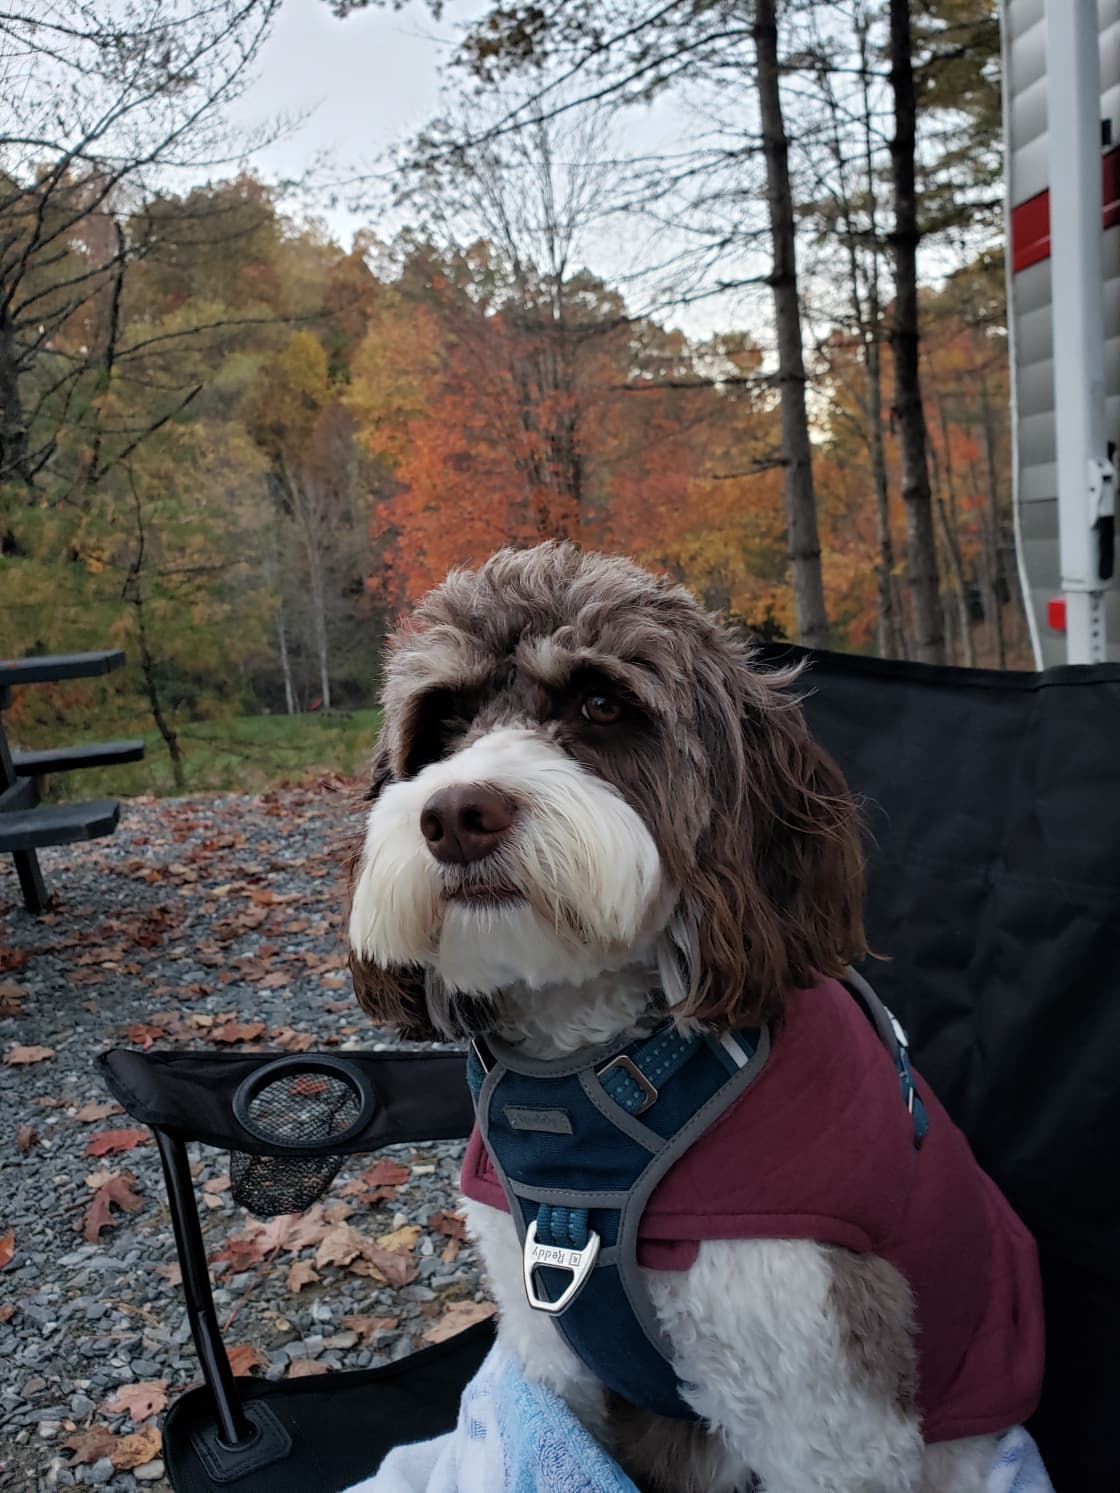 Our pup LOVED camping!!